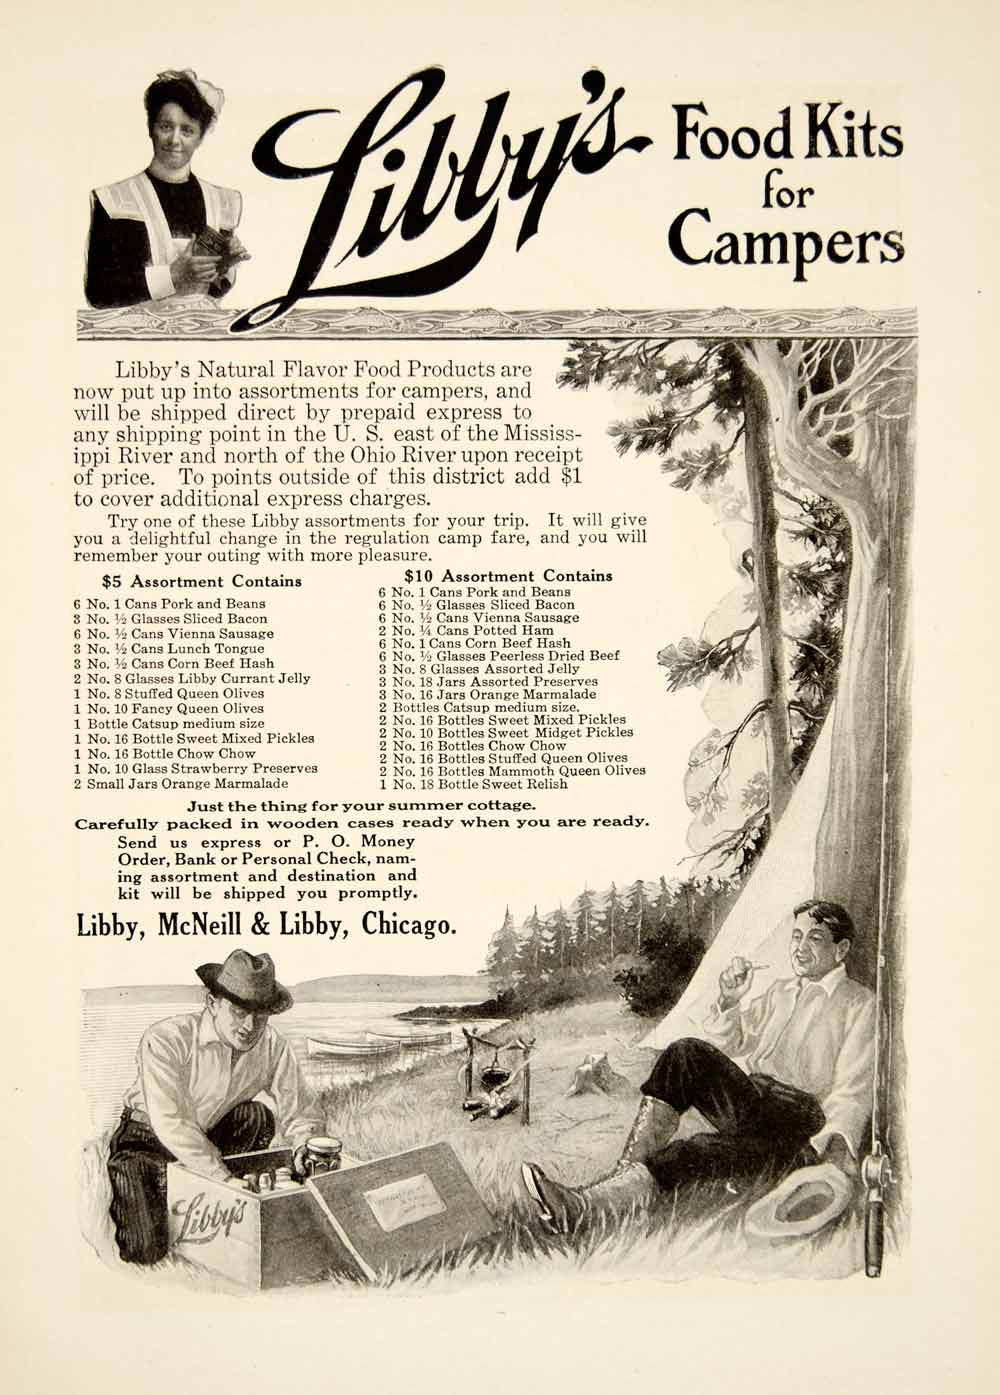 1909 Ad Vintage Libby Food Box Kits Campers Camping Relish Meats Condiments YSN2